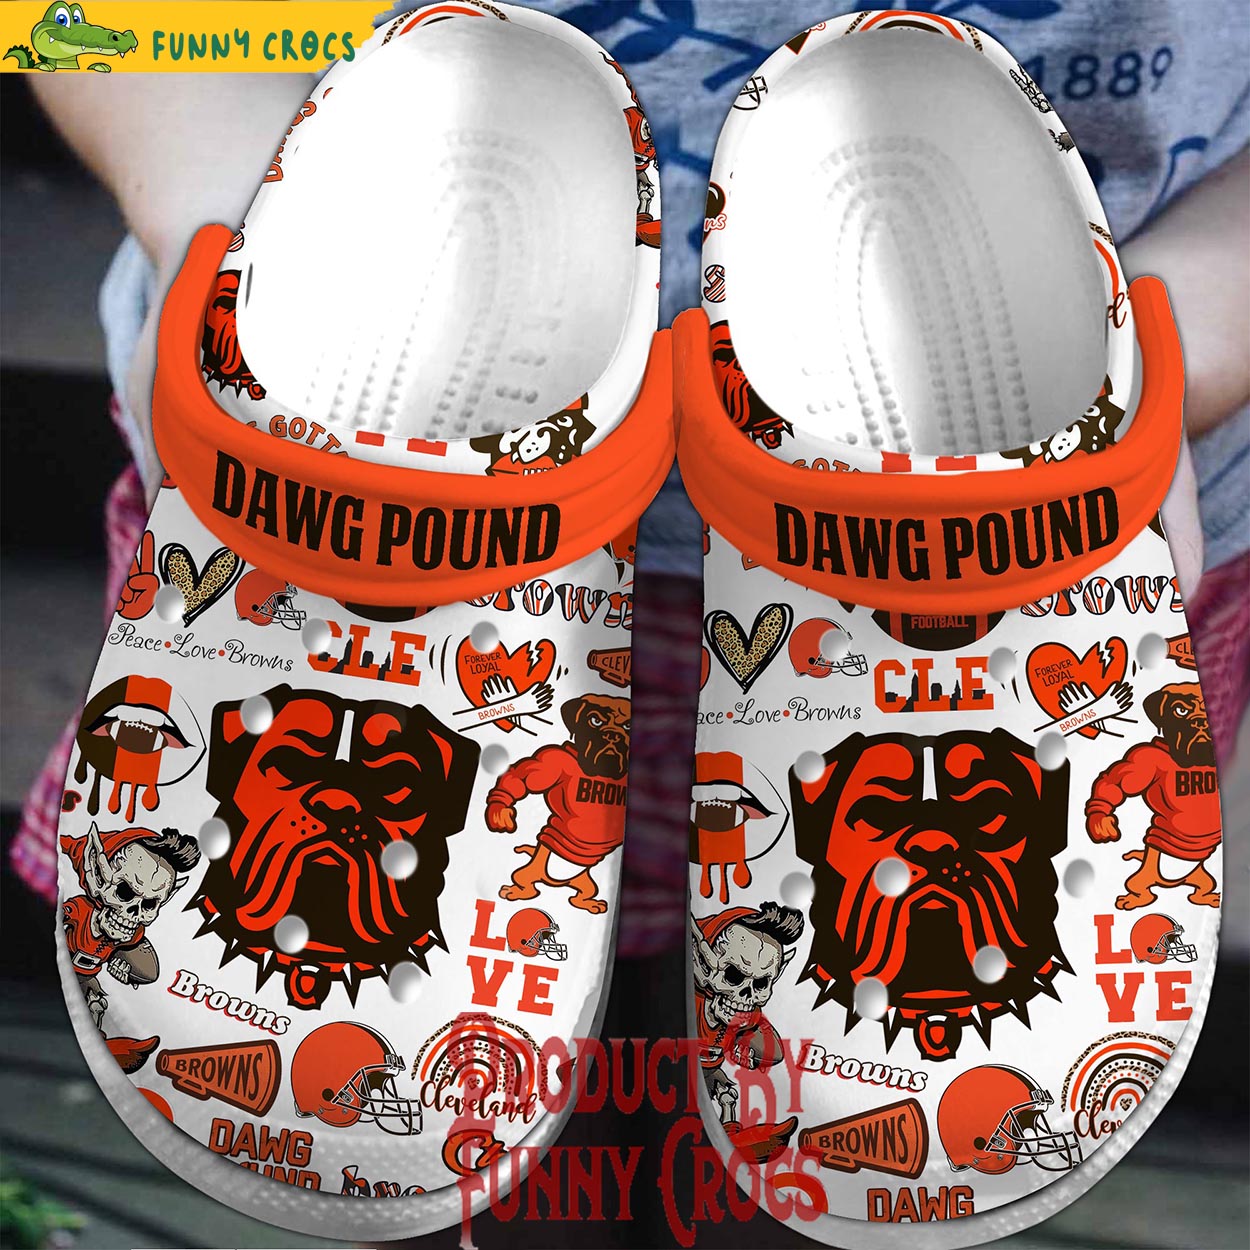 Cleveland Browns Dawgs Pound Crocs For Men - Discover Comfort And Style ...